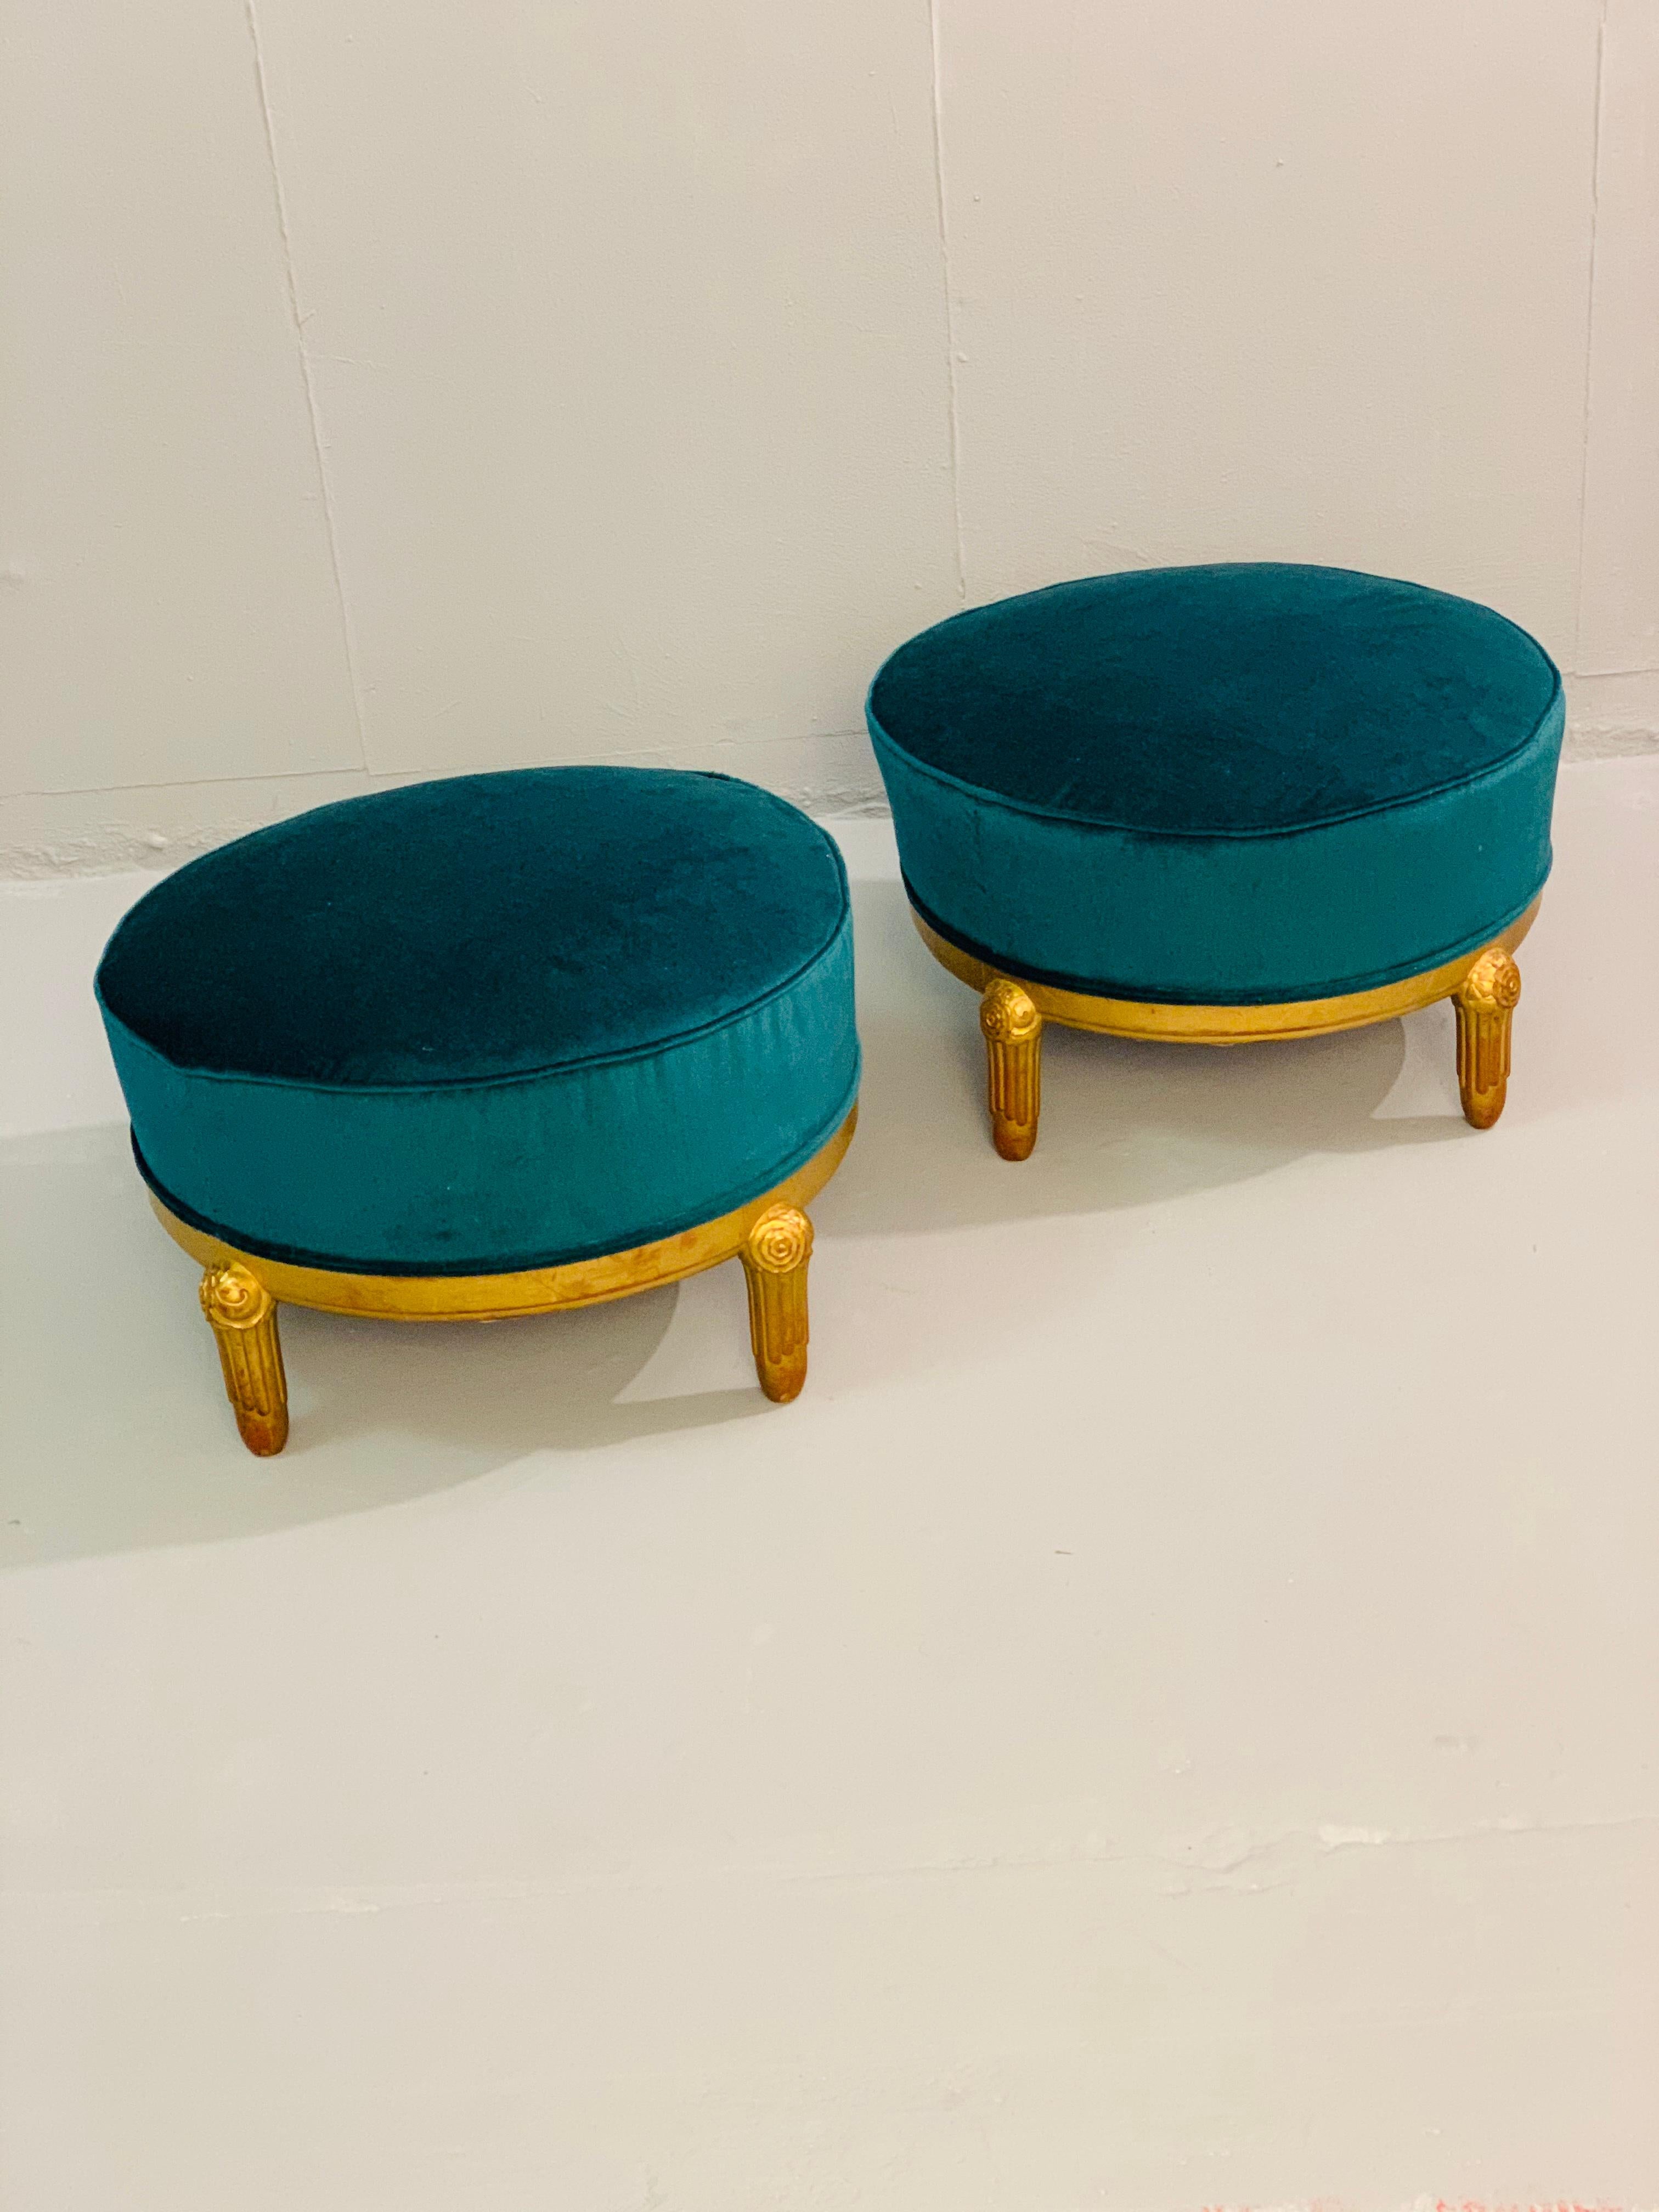 Pair of 1920s Art Deco Poufs attributed to Maurice Dufrésne.